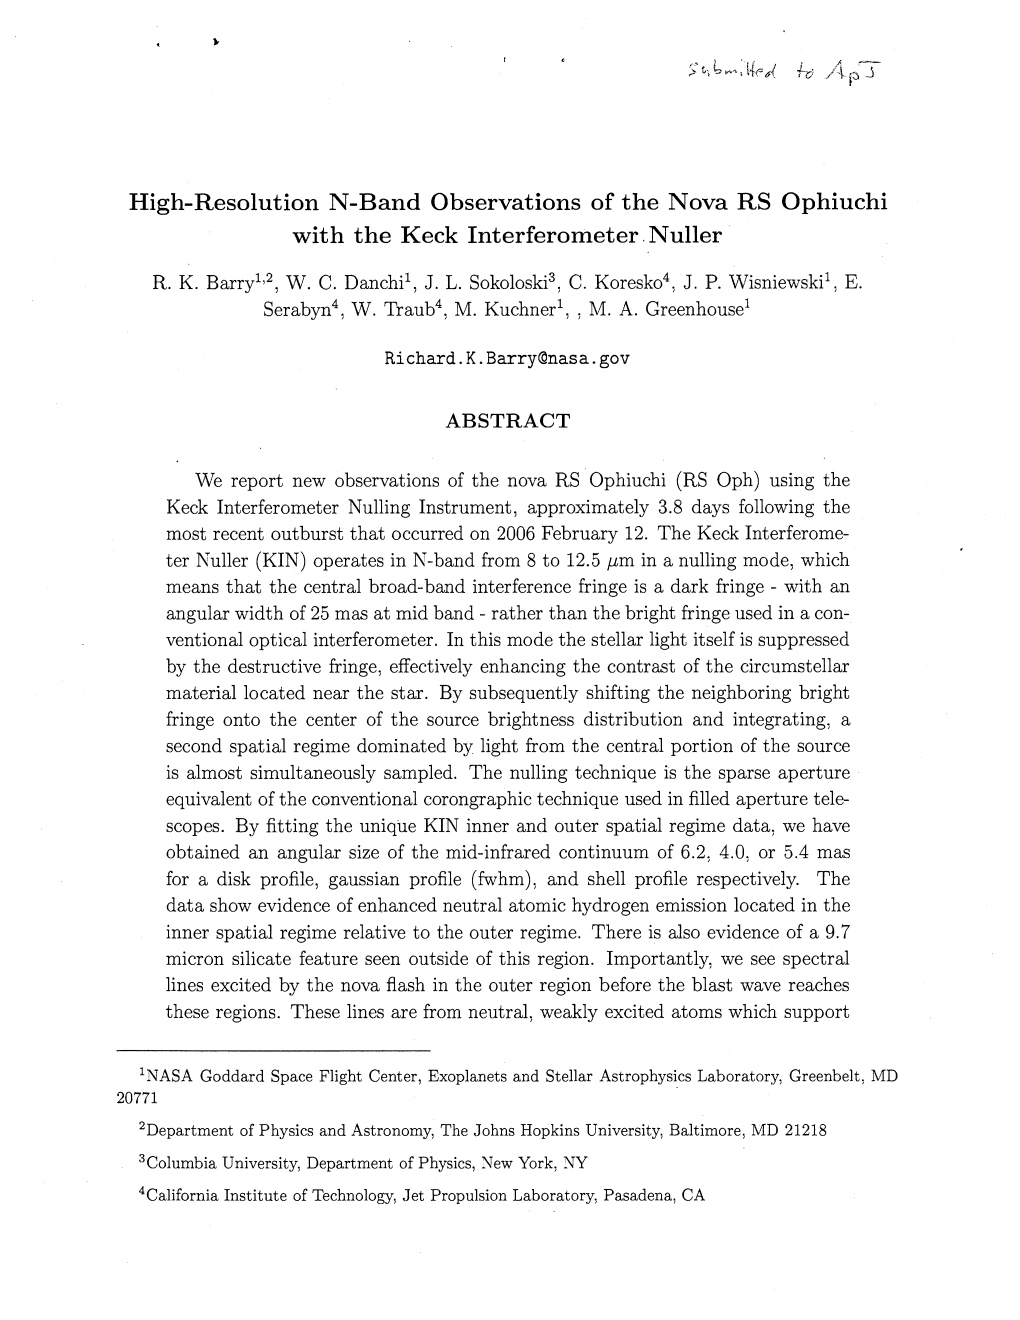 High-Resolution N-Band Observations of the Nova RS Ophiuchi with the Keck Interferometer Nuller